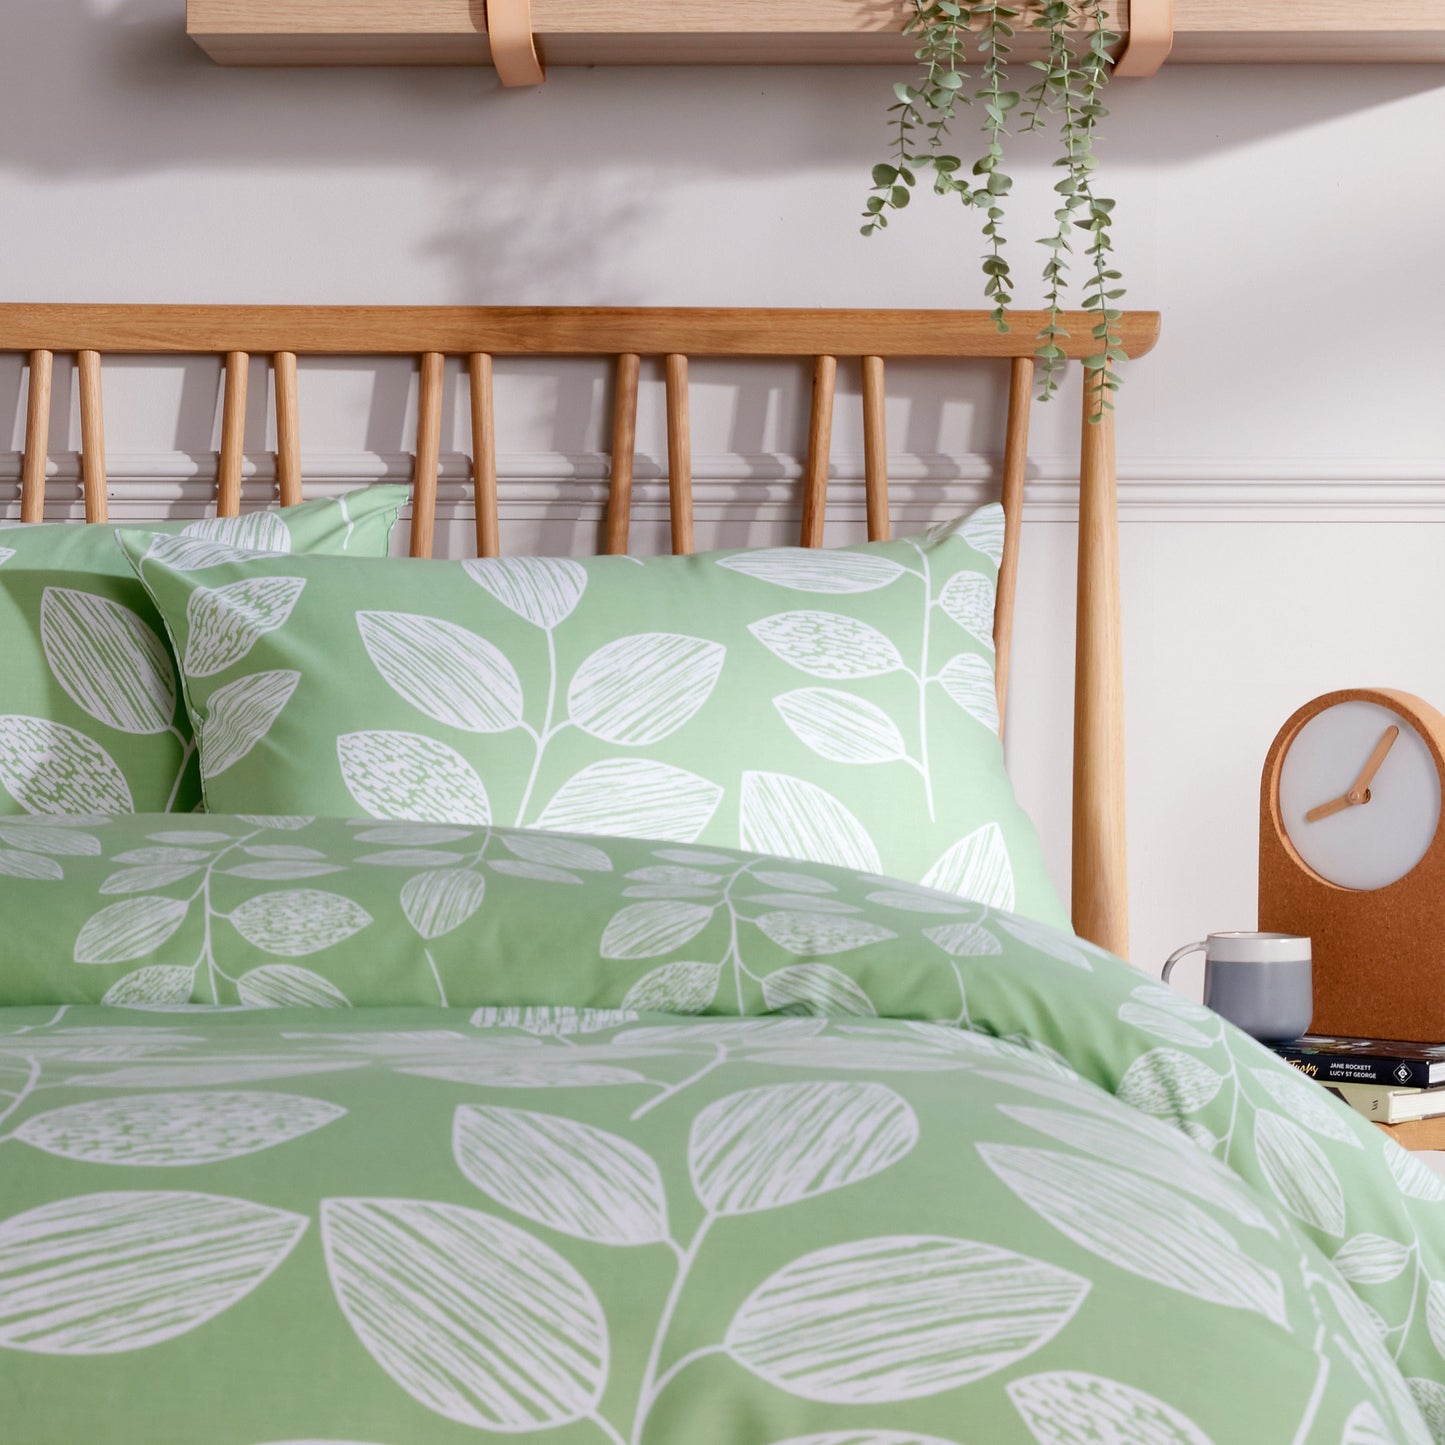 Leaves Printed Duvet Cover Set Reversible Pattern Quilt Bed Cover Sets with Pillowcase OLIVIA ROCCO Duvet Cover